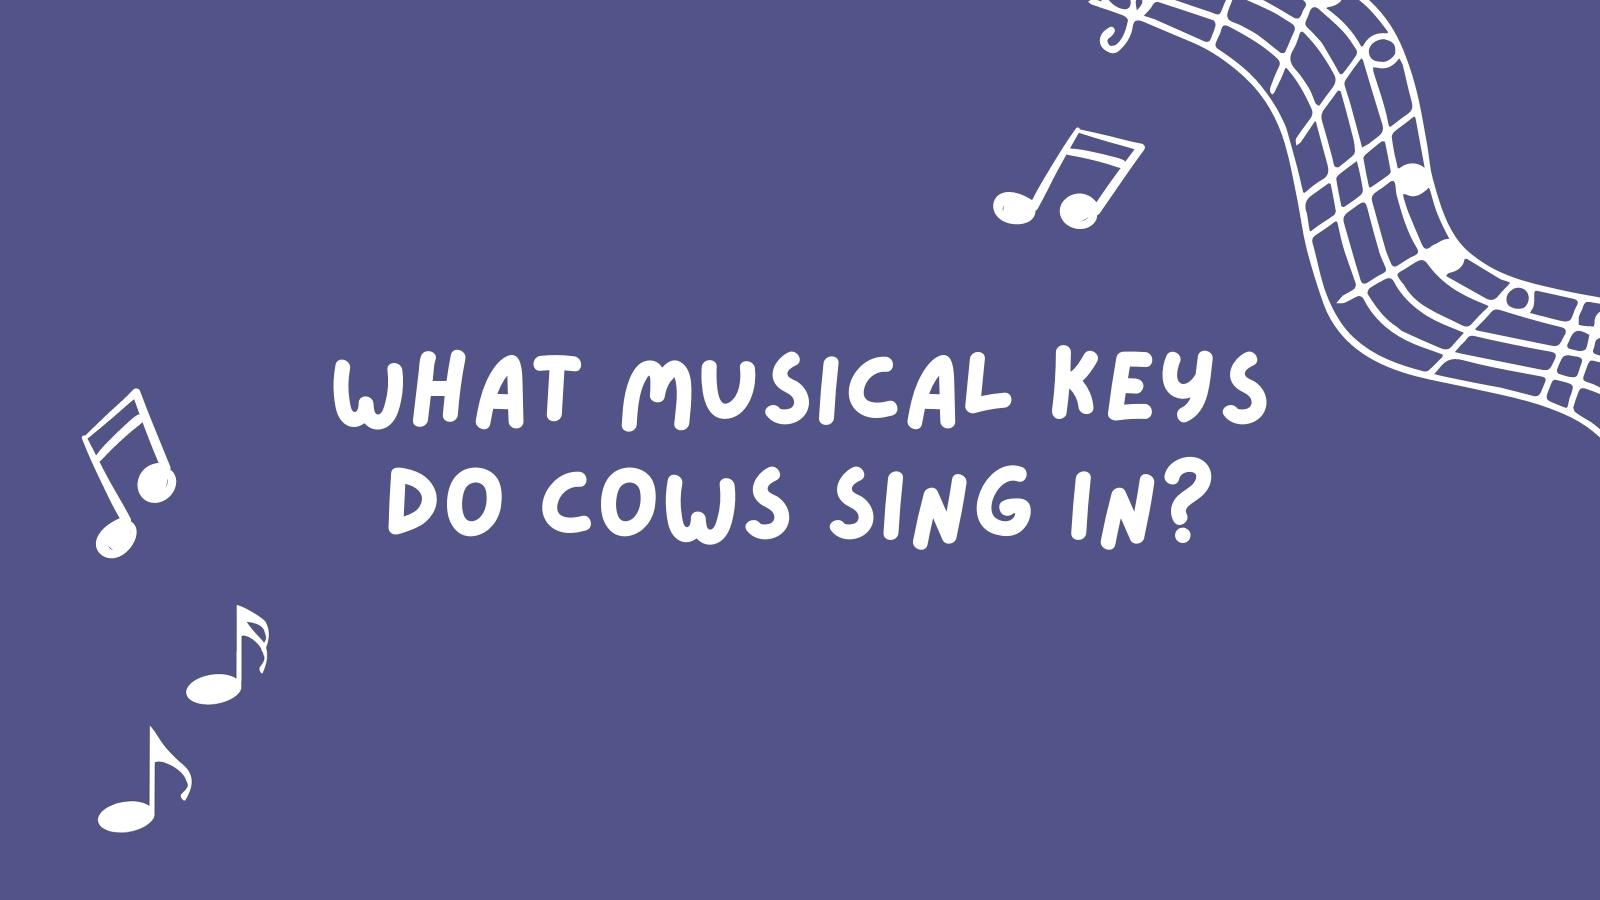 "what musical keys do cows sing in?"